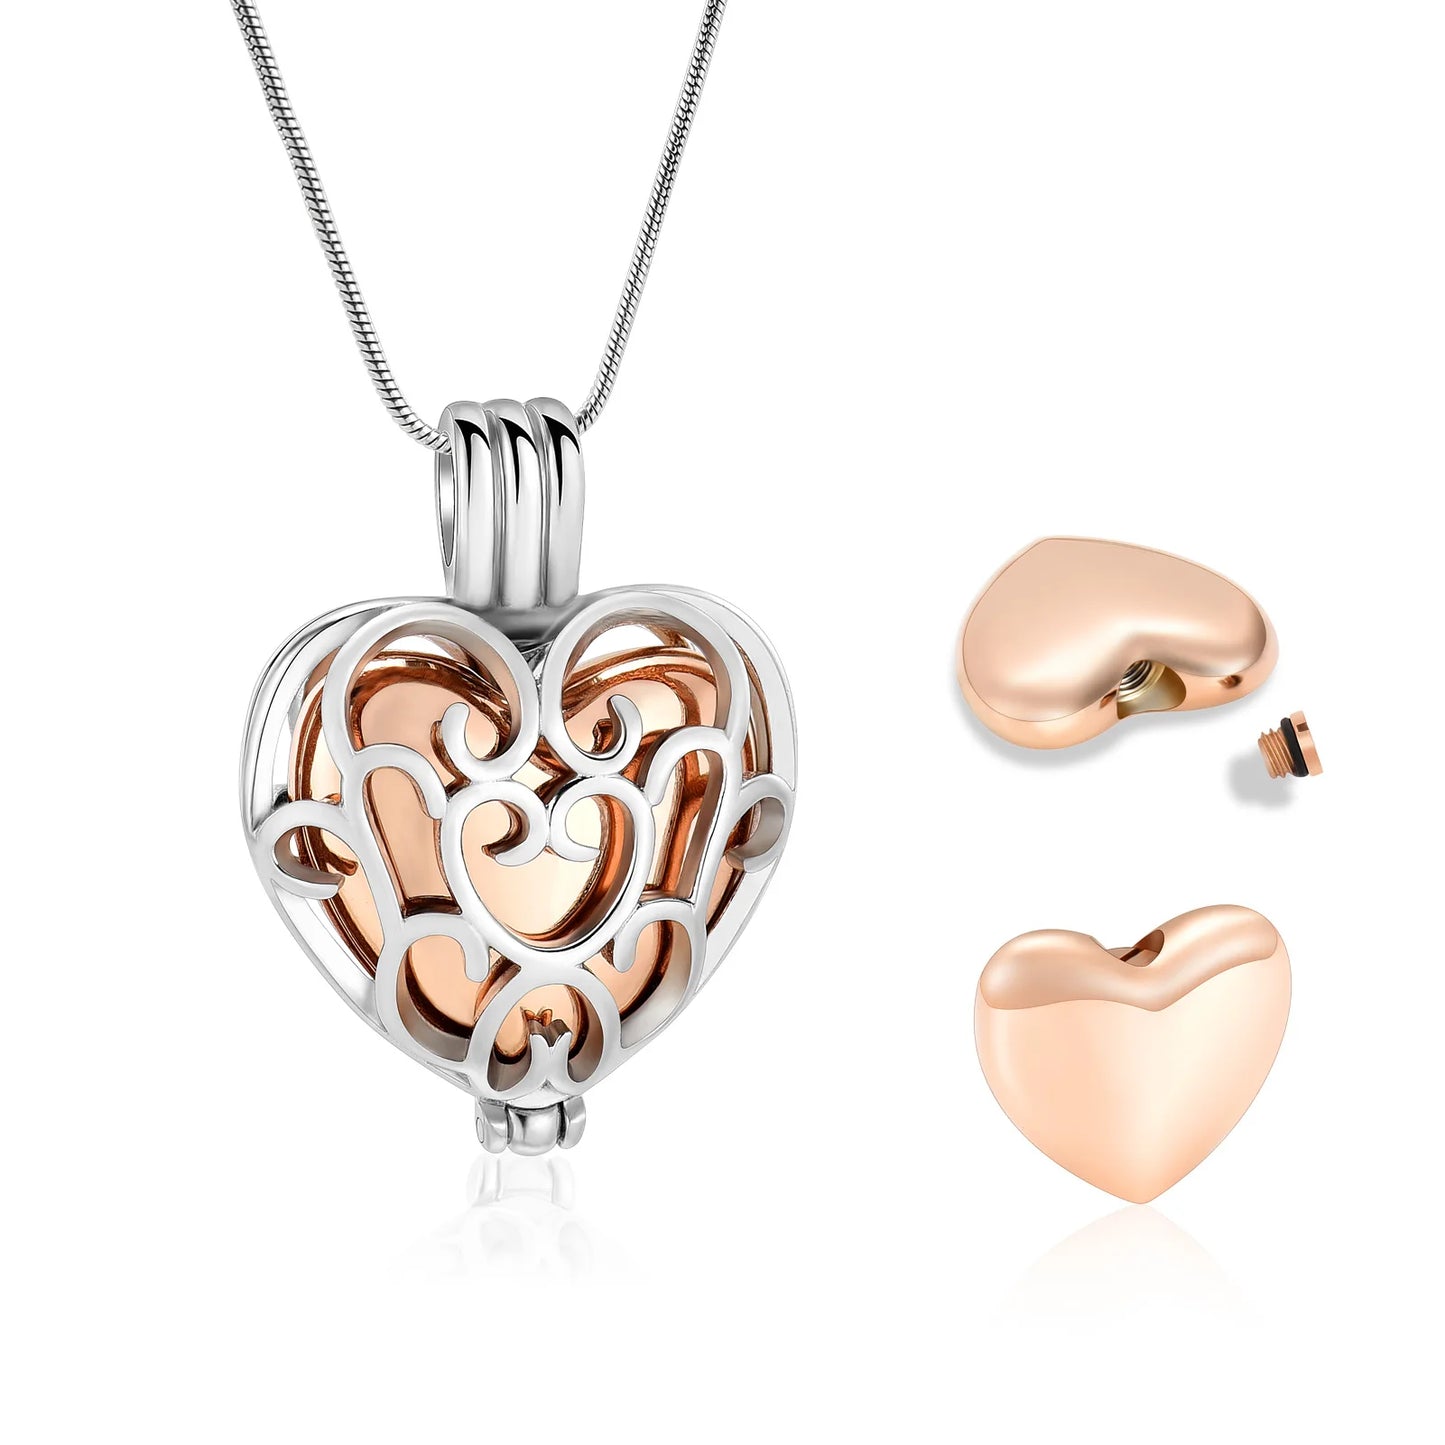 Inside Mini Heart Urn  Cremation Jewelry For Ashes Keepsake Pendant Necklace